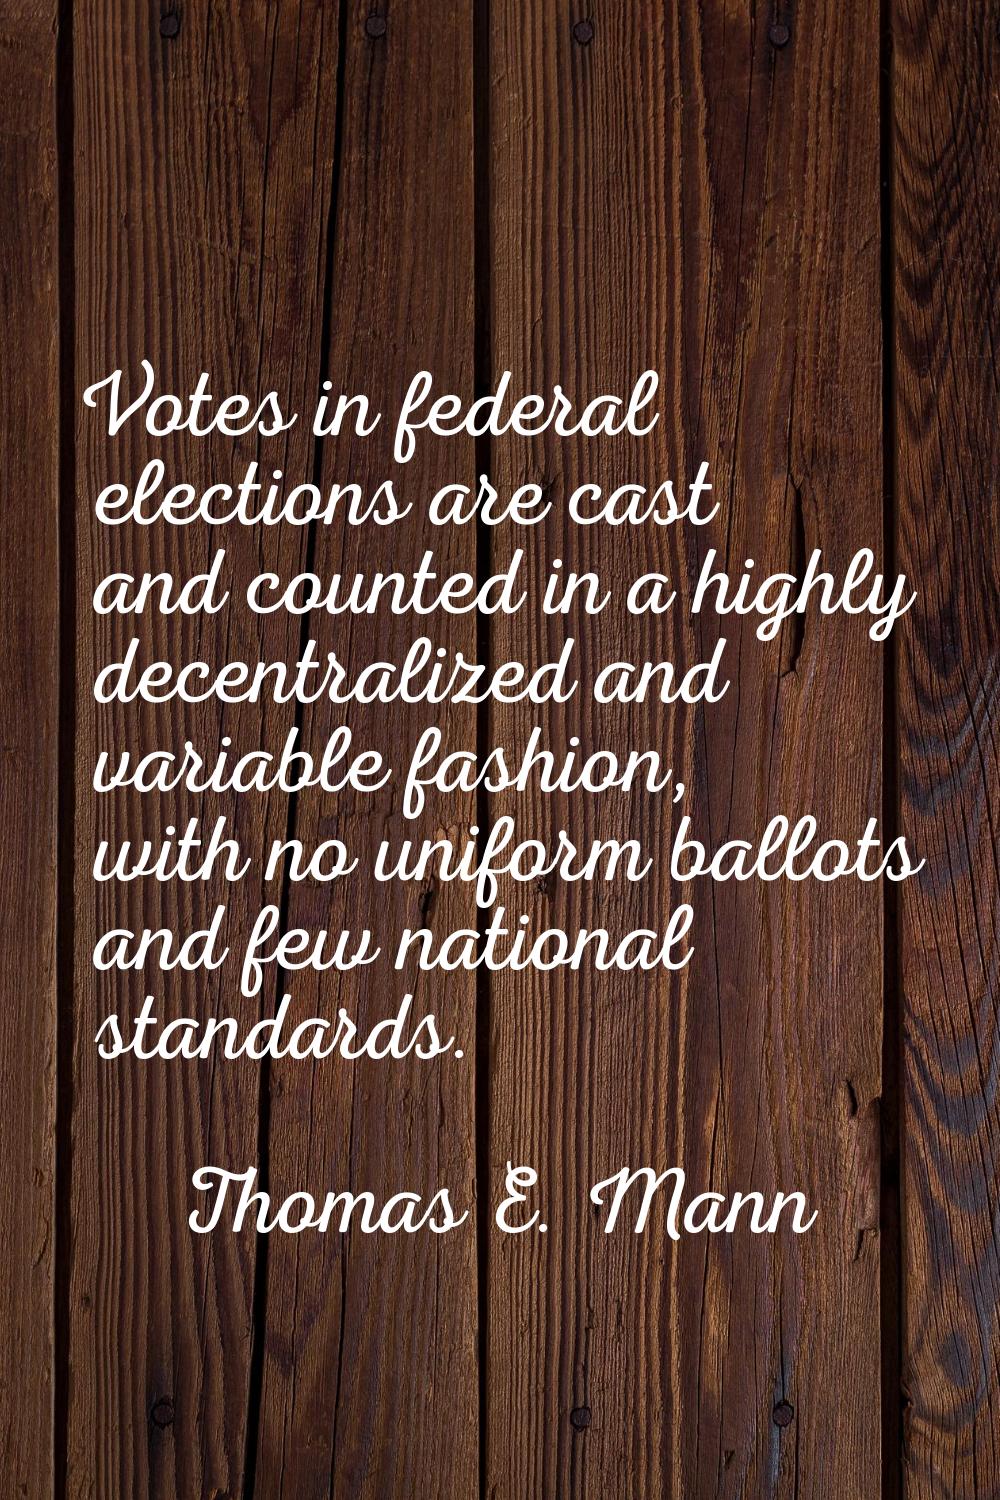 Votes in federal elections are cast and counted in a highly decentralized and variable fashion, wit